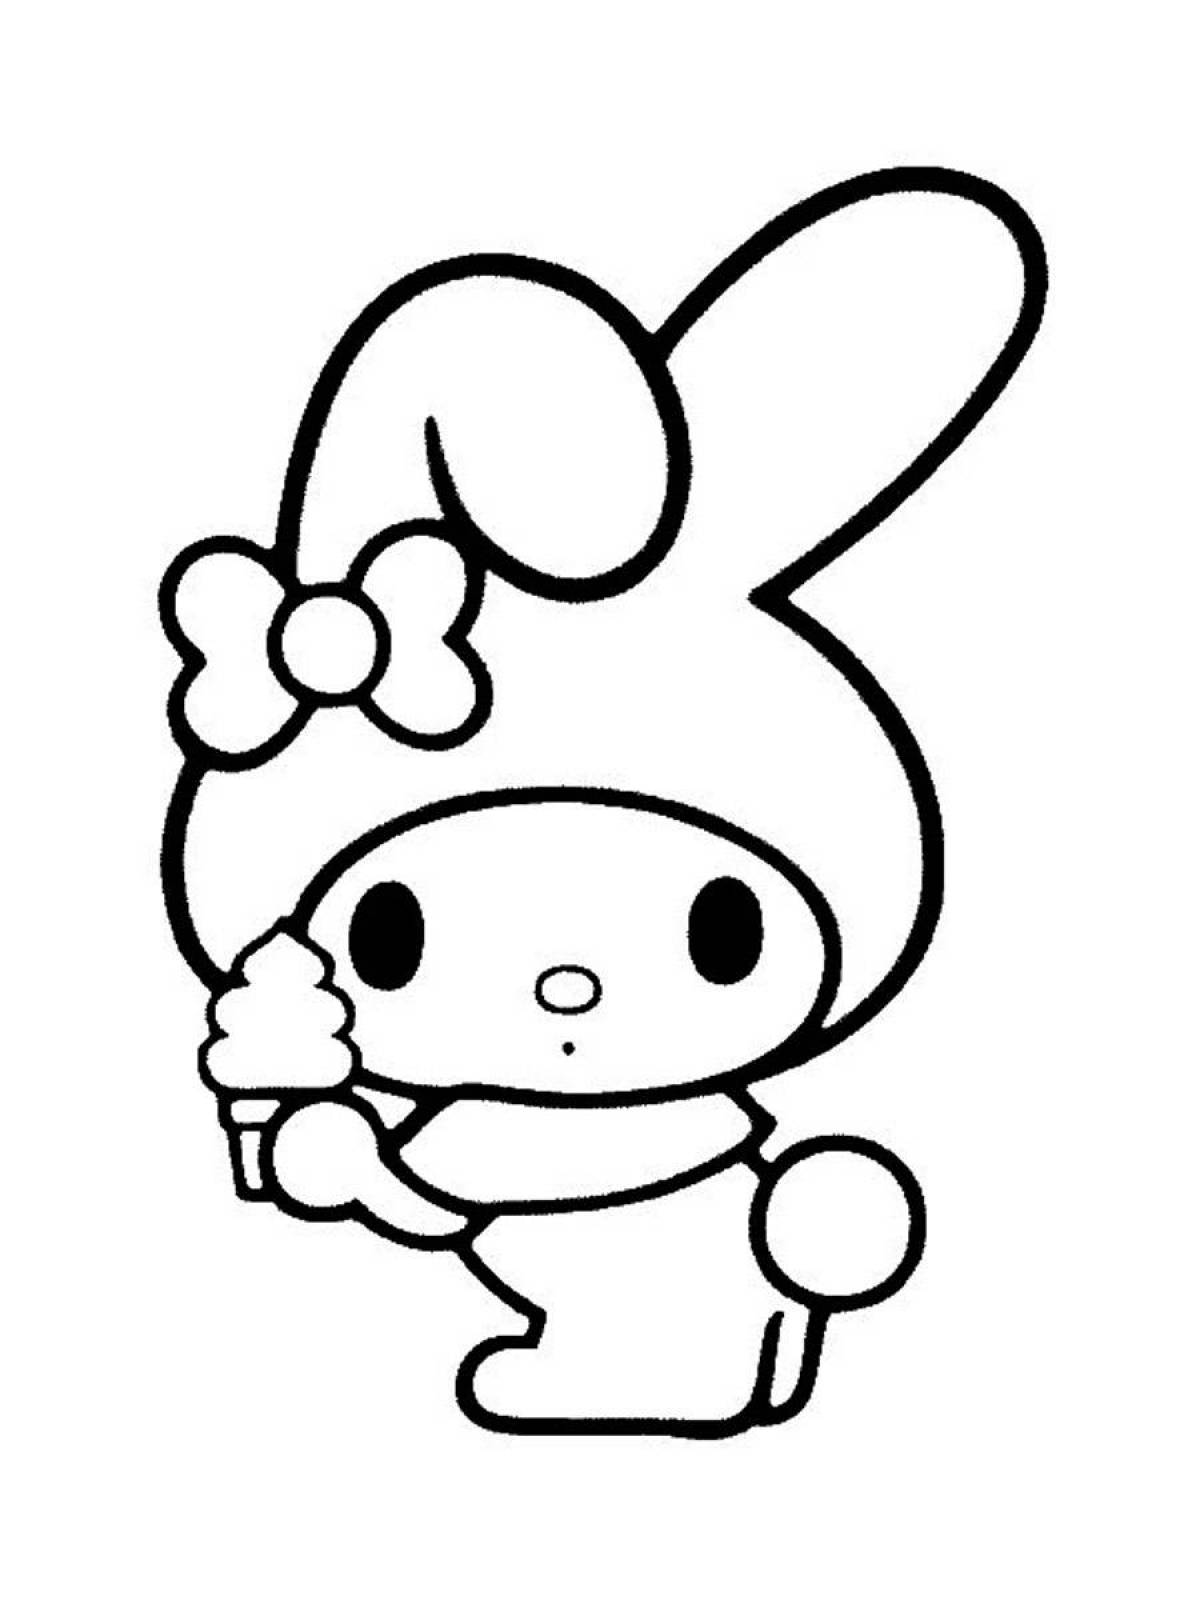 Adorable hello kitty melodies coloring page